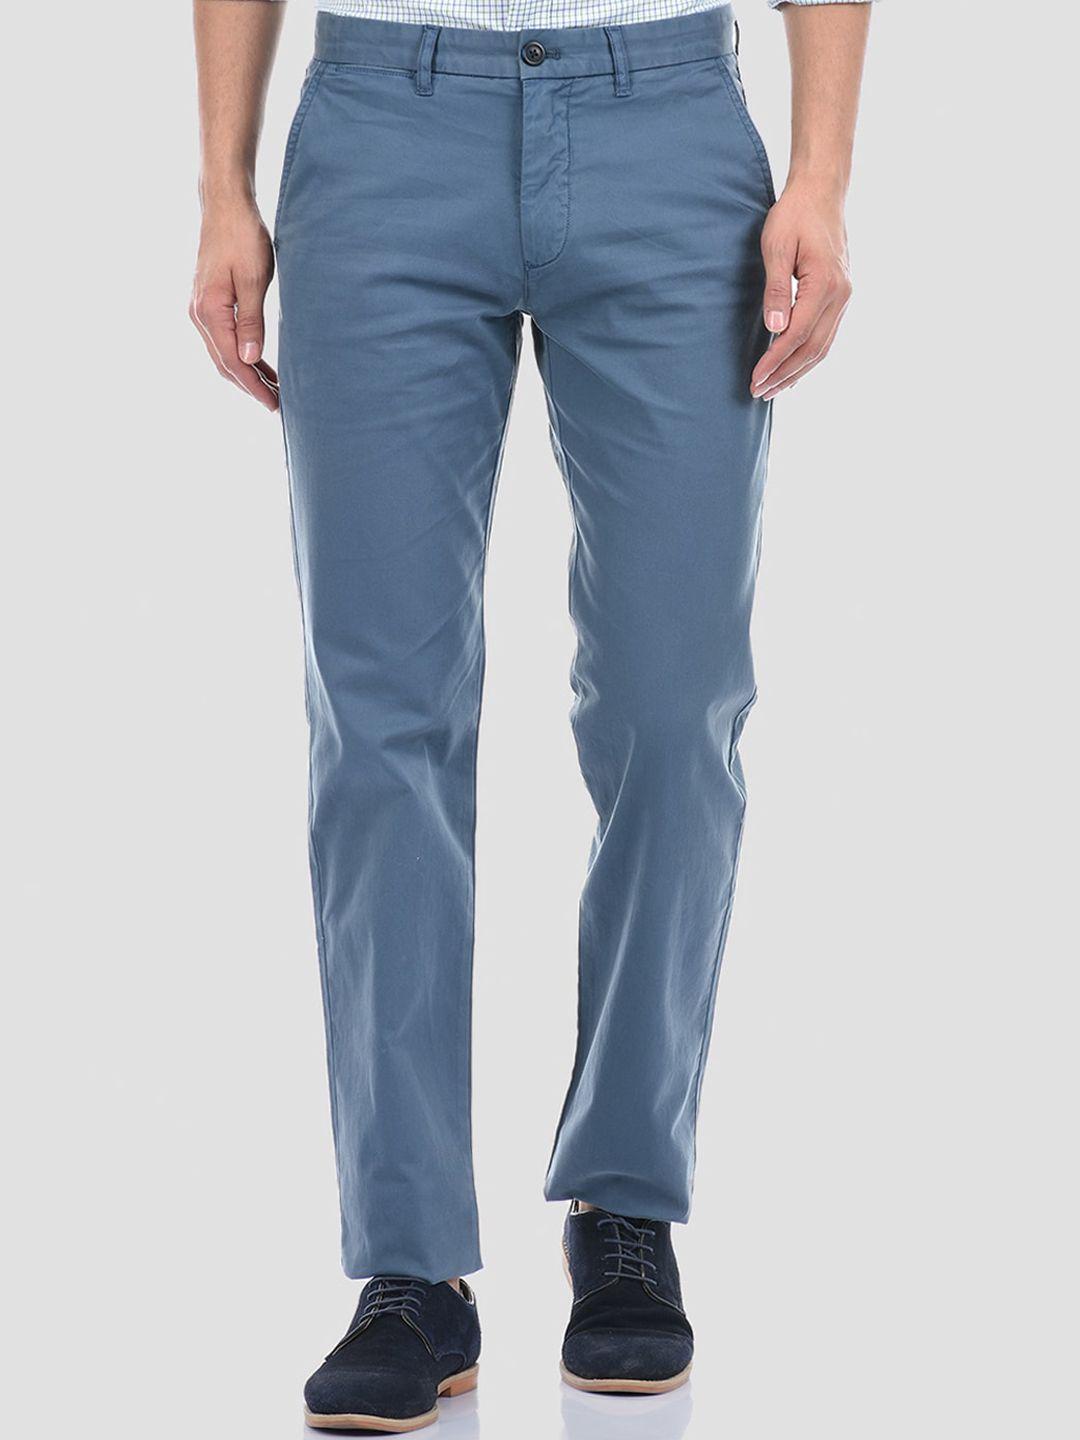 london-fog-men-blue-low-rise-chinos-trousers